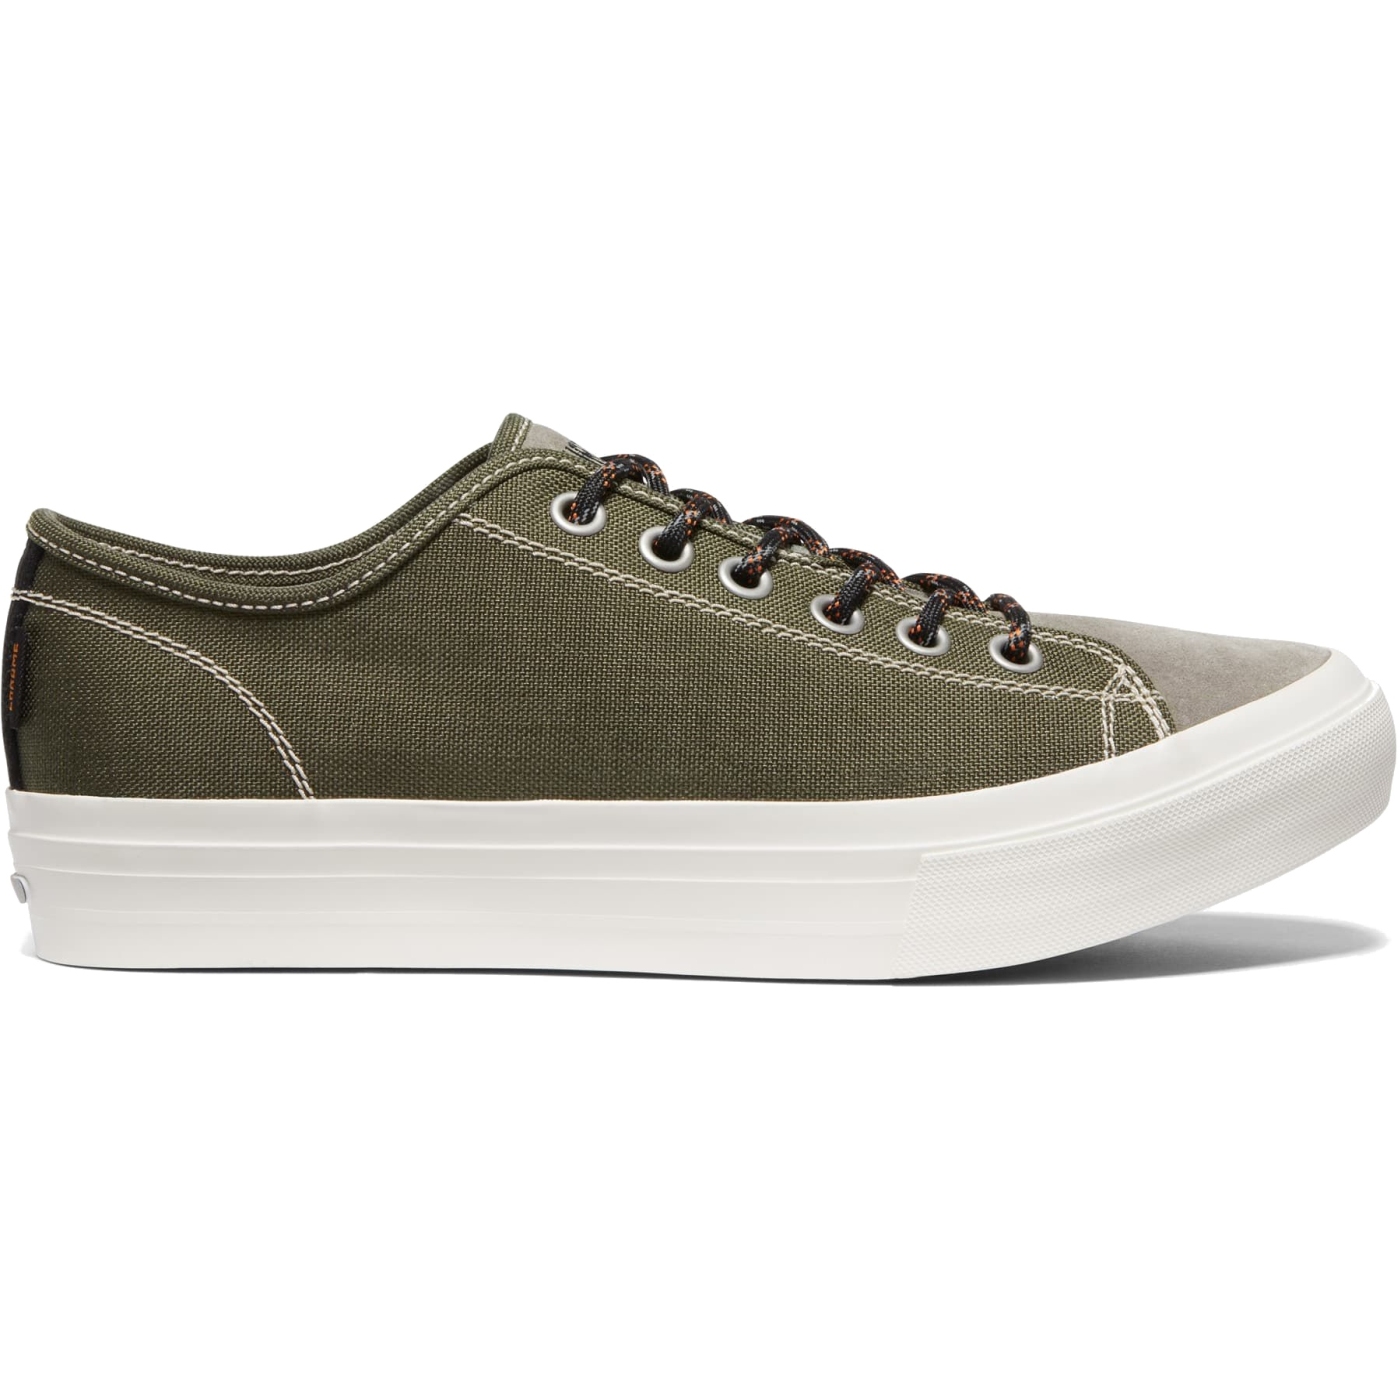 Productfoto van CHROME Kursk AW Cycling Shoes - Olive Forest